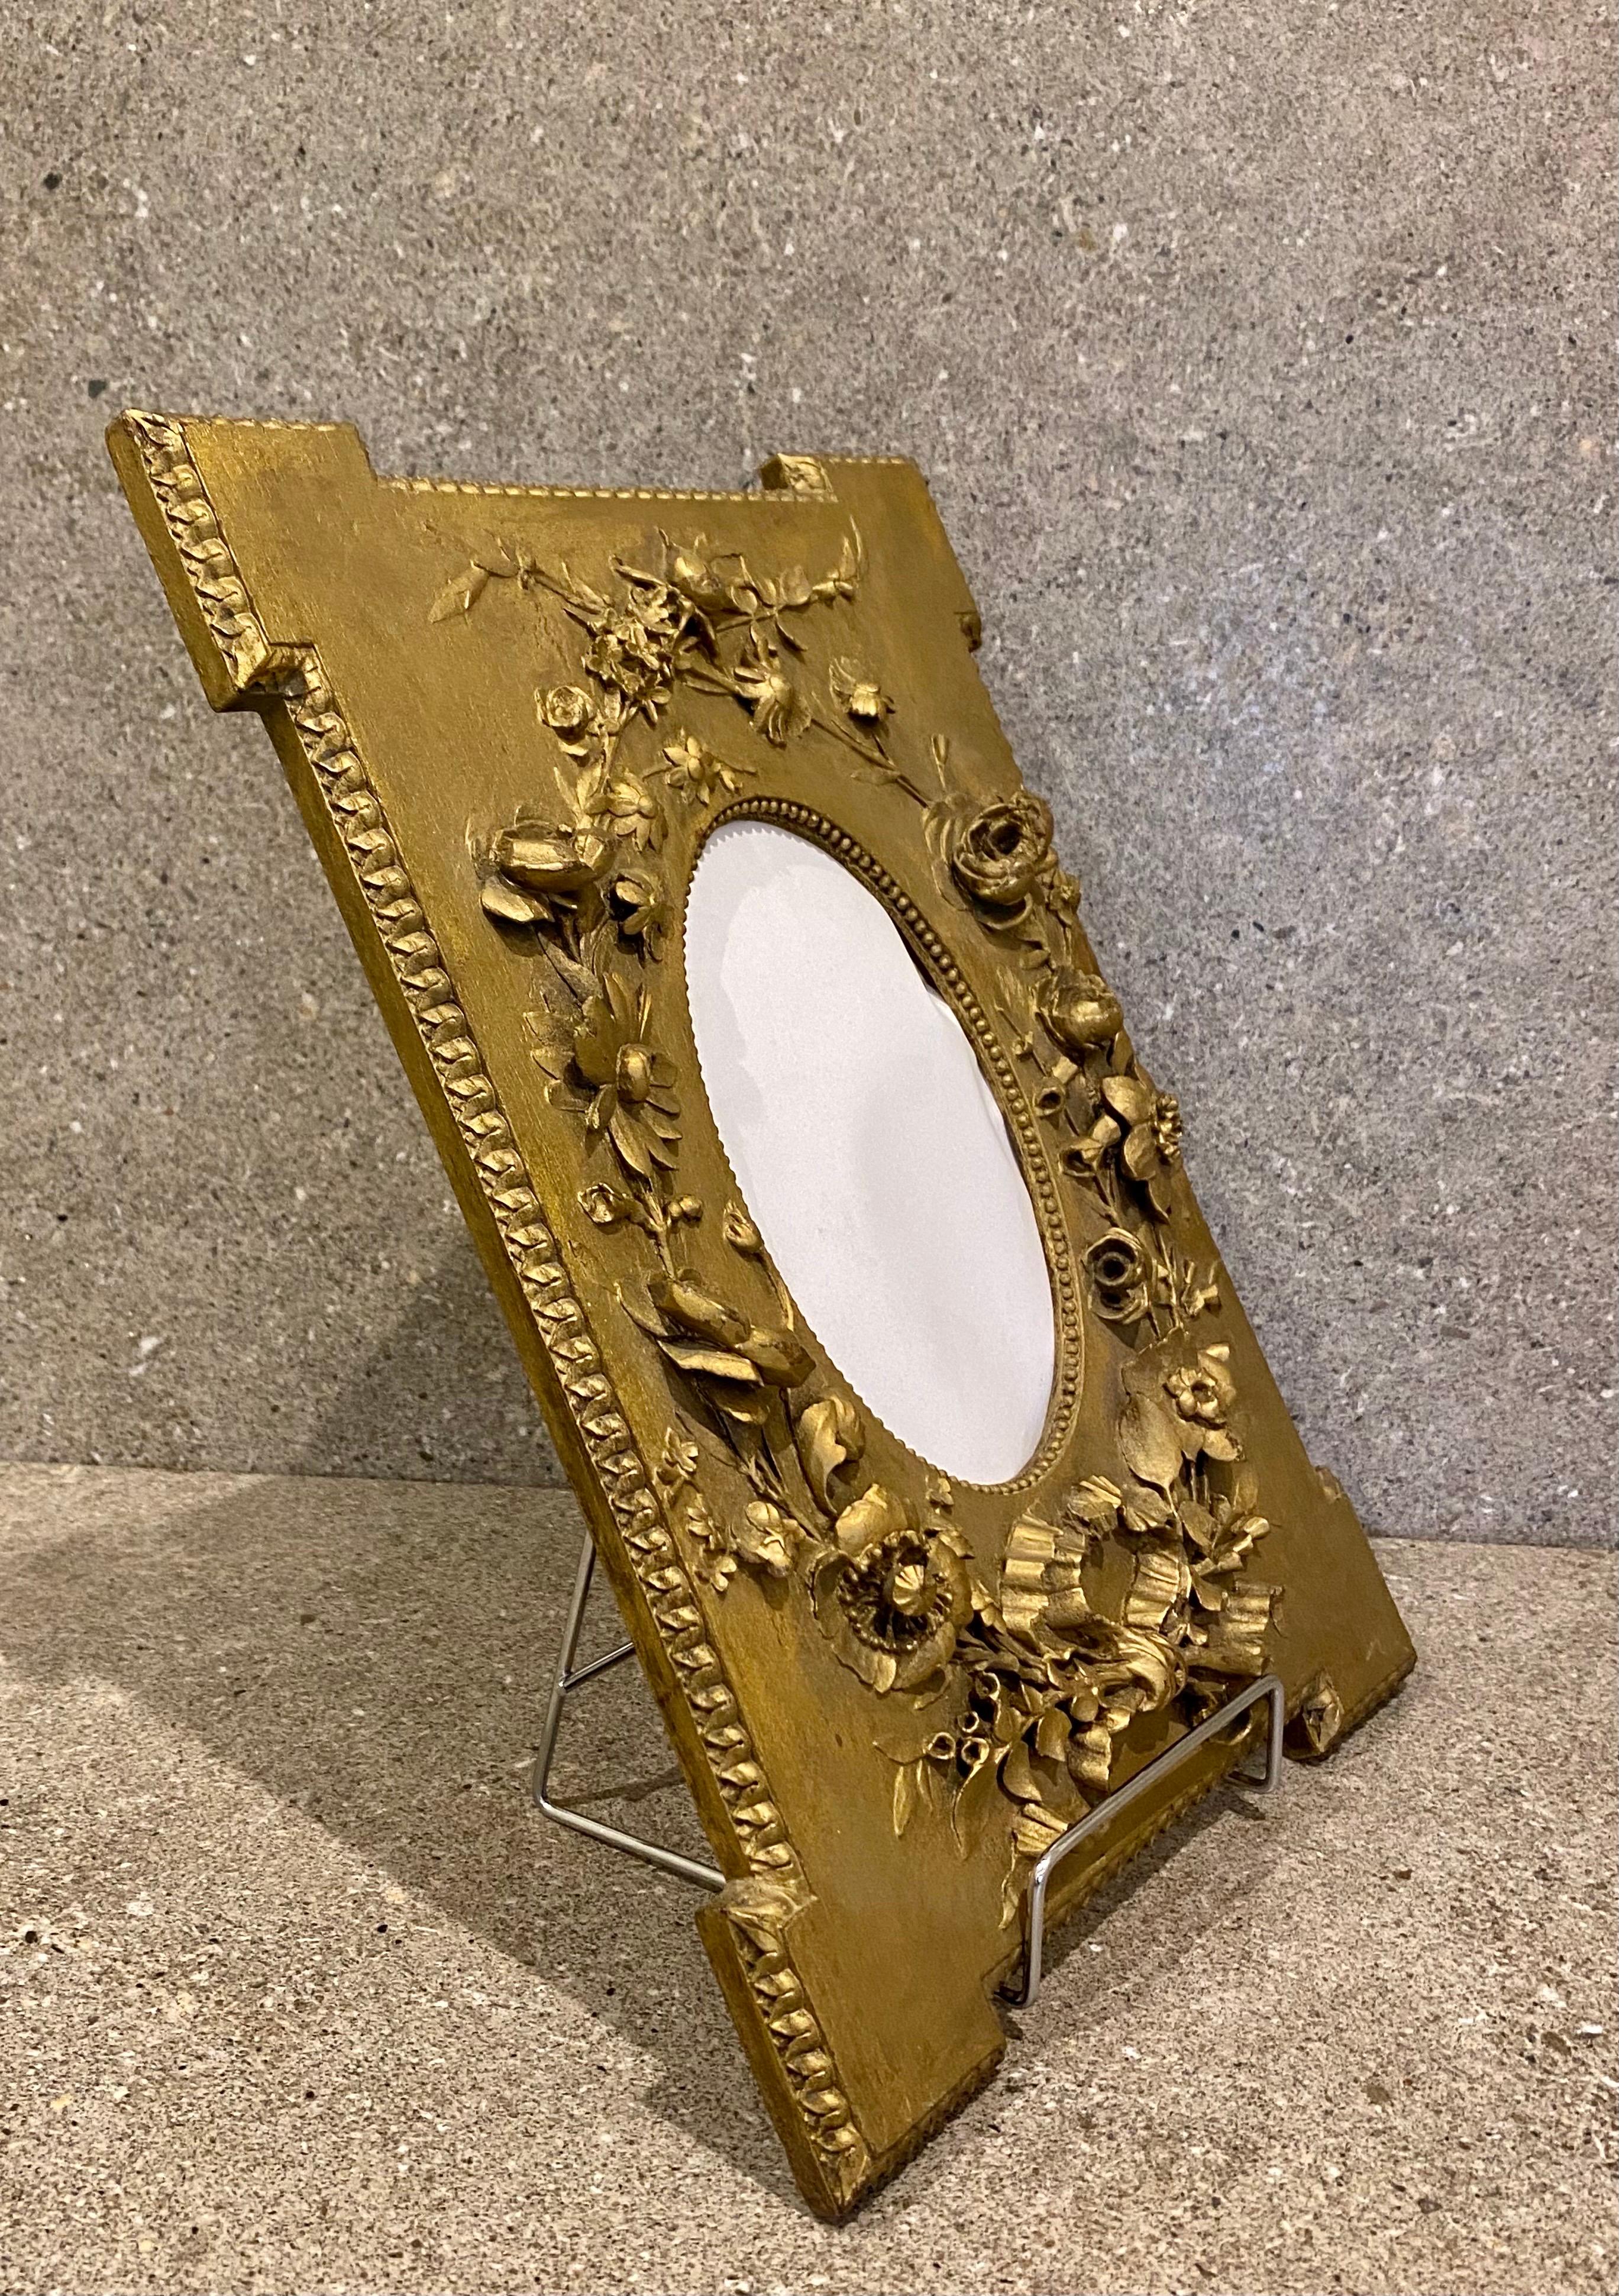 A large superb quality antique hand carved high relief giltwood photo frame Circa 19th Century
A solid wood frame (not gesso) with original gold patination.
Made in the late 19th century from thick solid timber depicting deeply carved flowers,